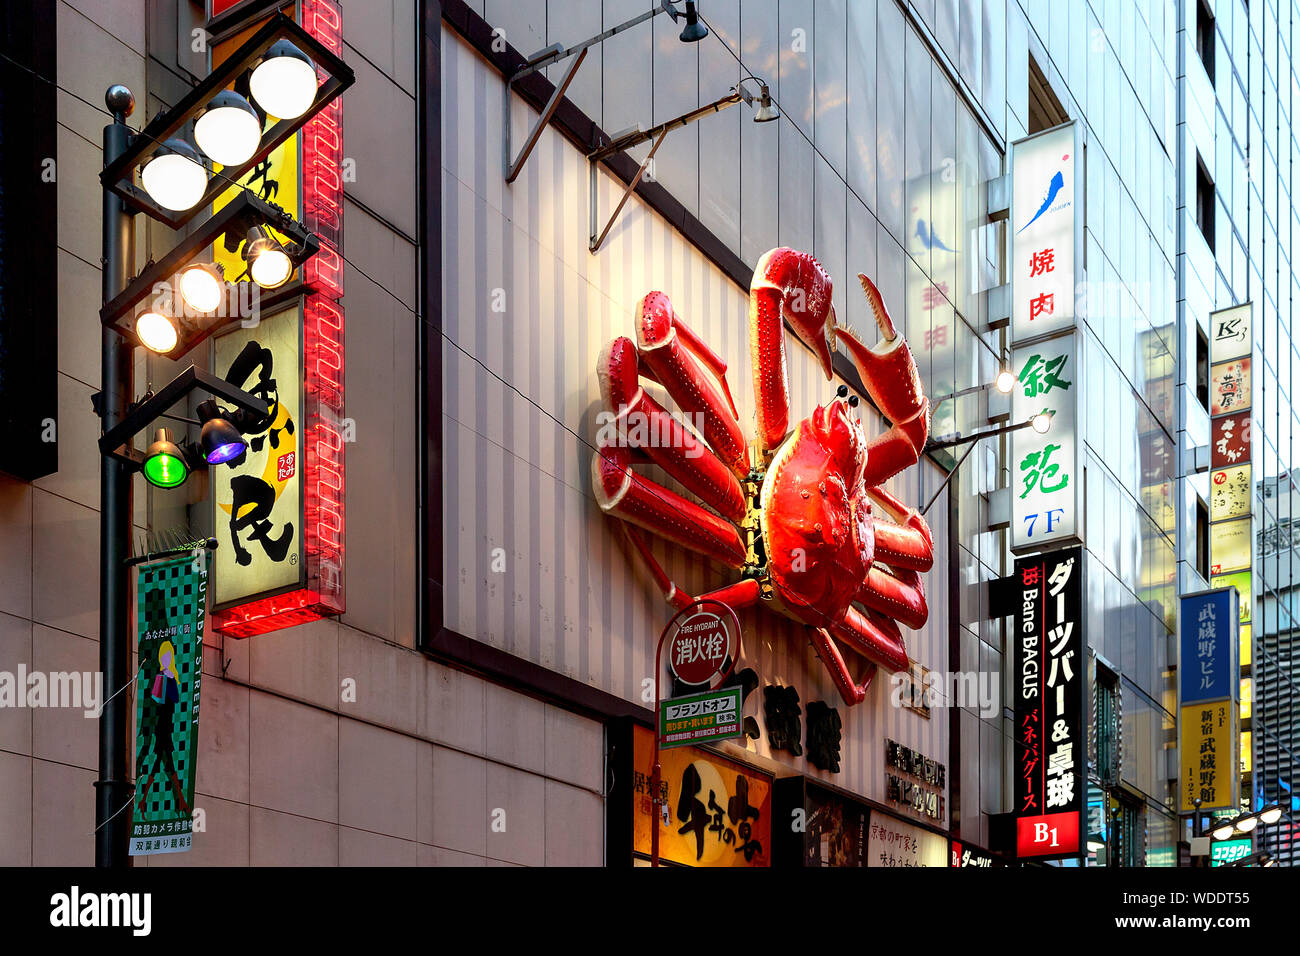 A giant red crab on the wall, sign of Kani Doraku crab food chain located in Shinjuku district, central Tokyo. Stock Photo